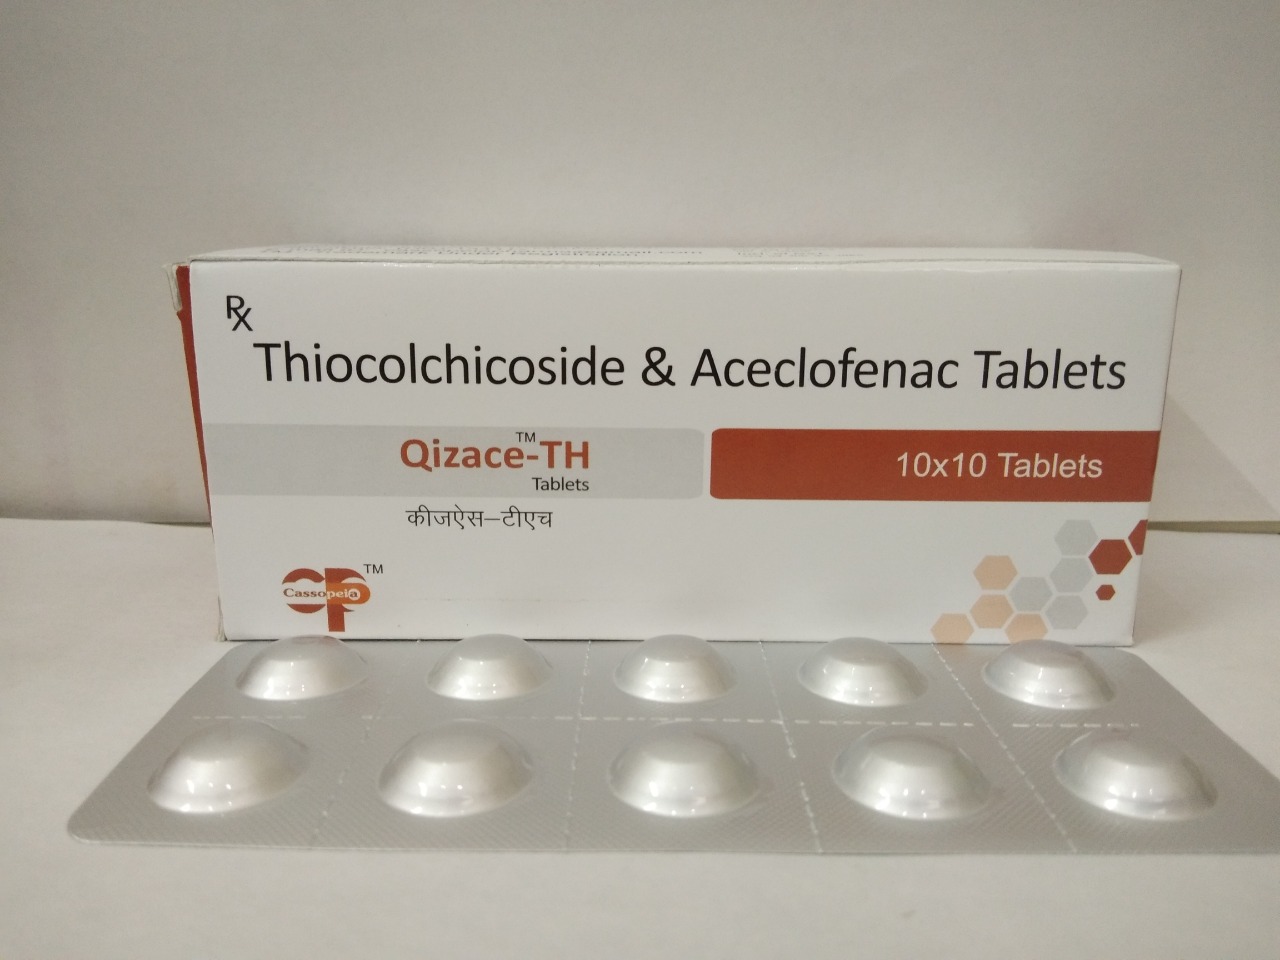 Product Name: Qizace TH, Compositions of Qizace TH are Thocolchicoside & Aceclofenac Tablets - Cassopeia Pharmaceutical Pvt Ltd